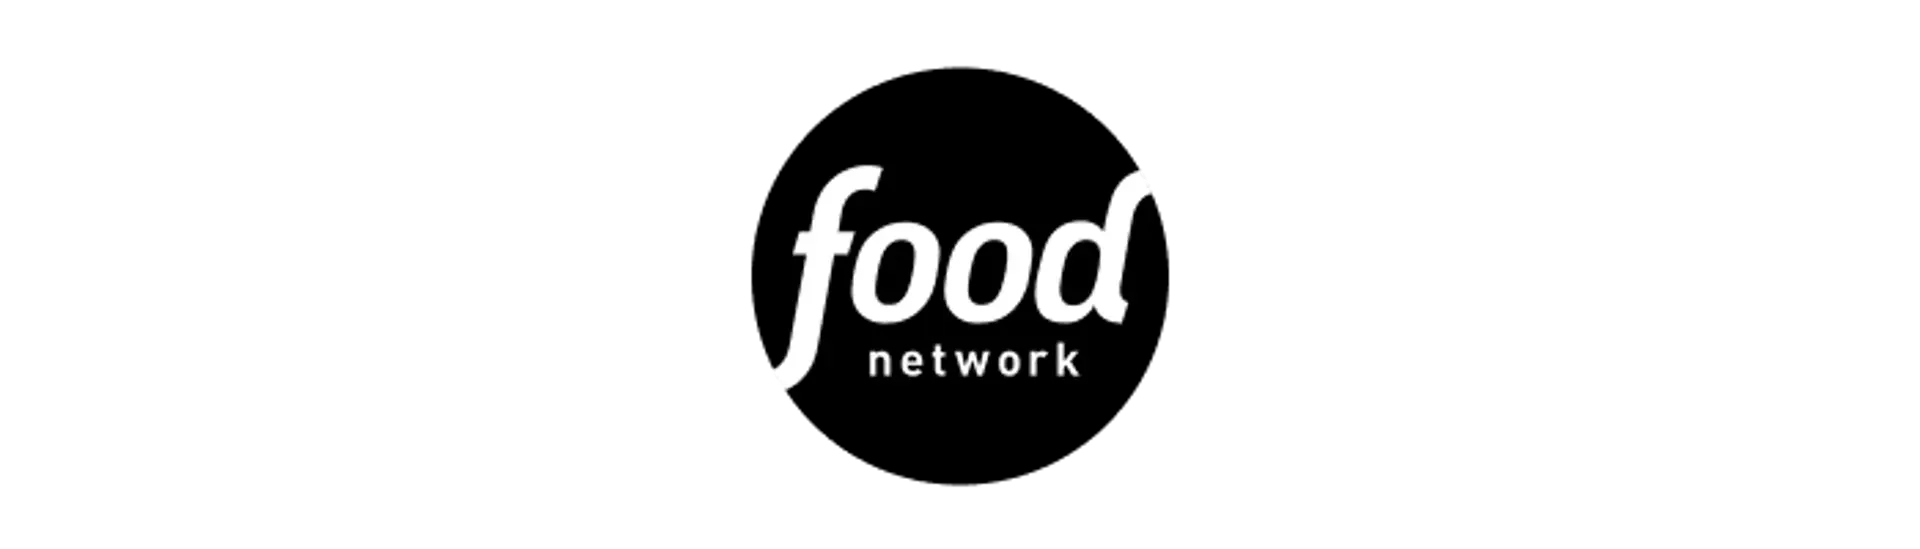 A black background featuring the white "Food Network" logo in a stylized font.